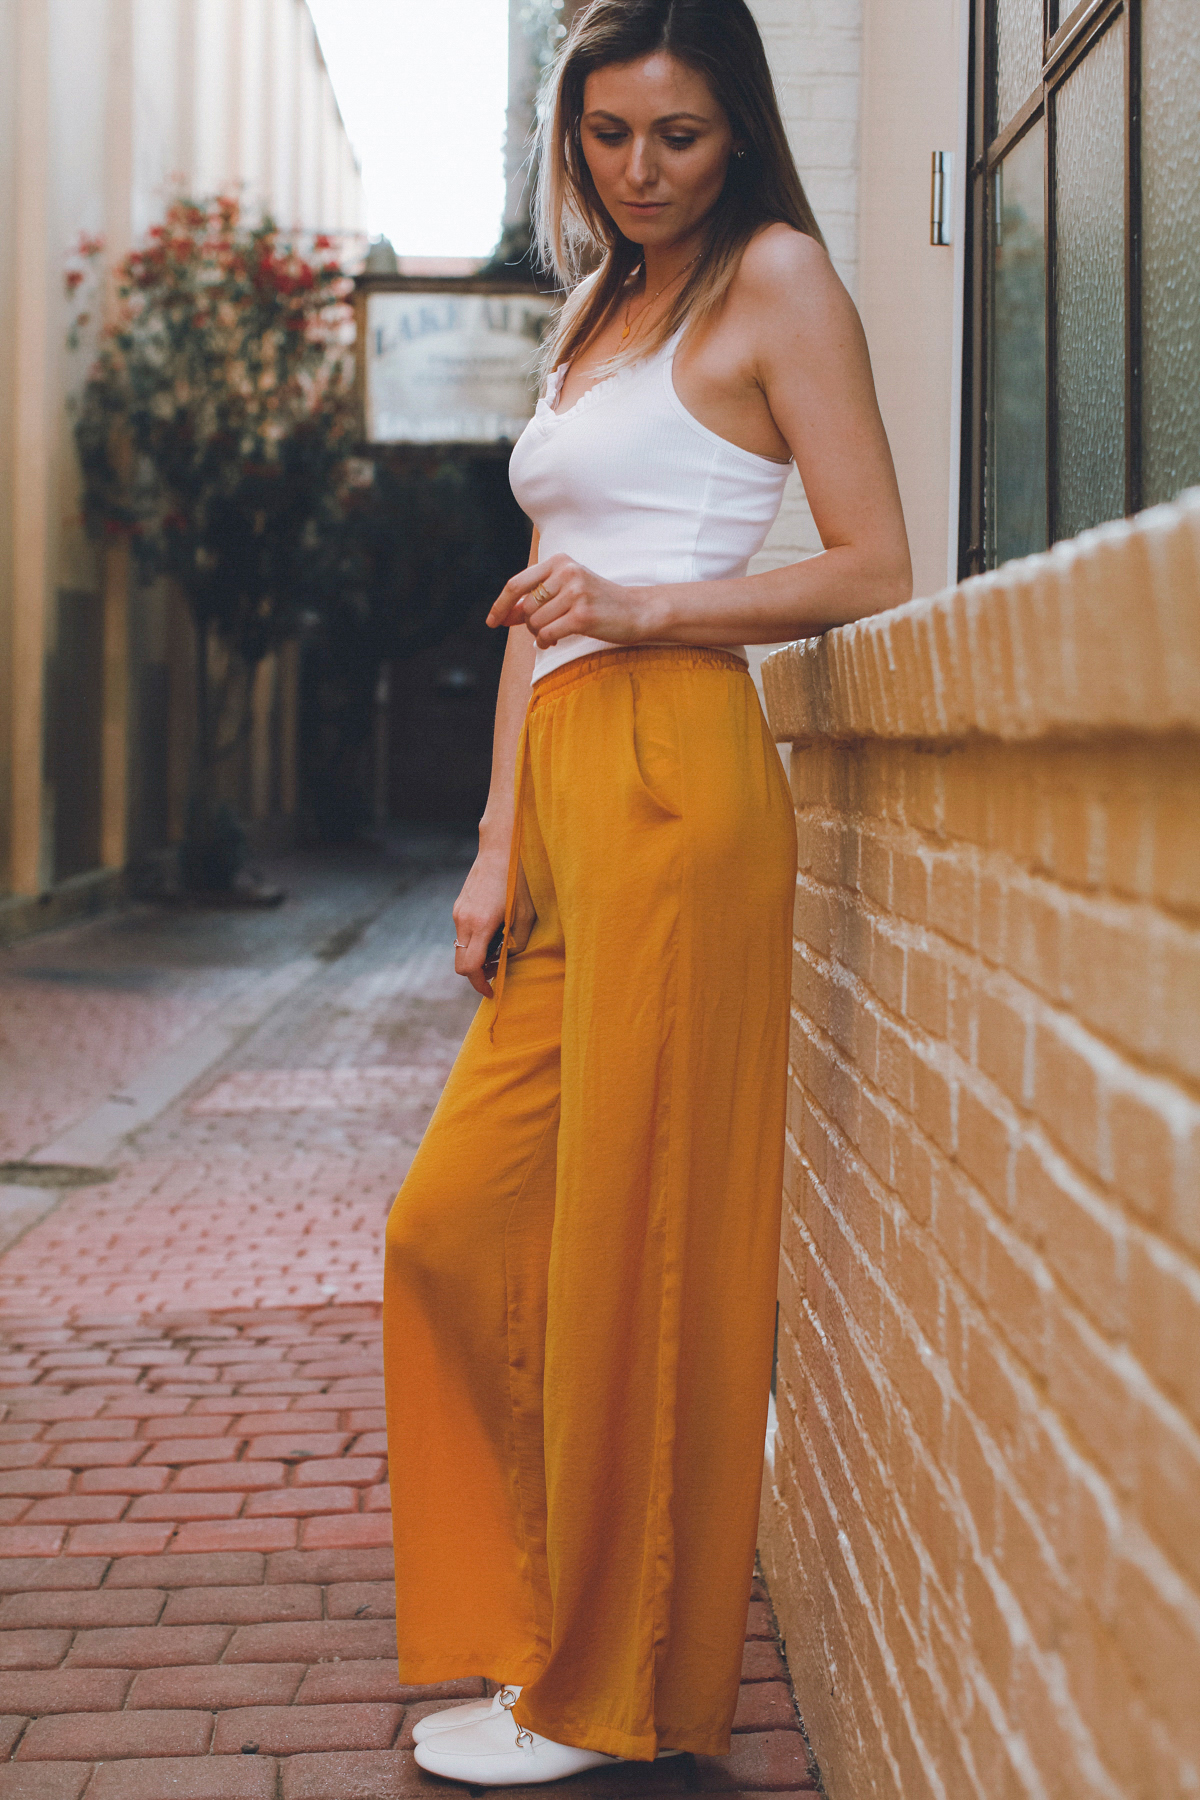 Yellow Silk Tank with Mustard Wide Leg Pants Outfits (2 ideas & outfits)